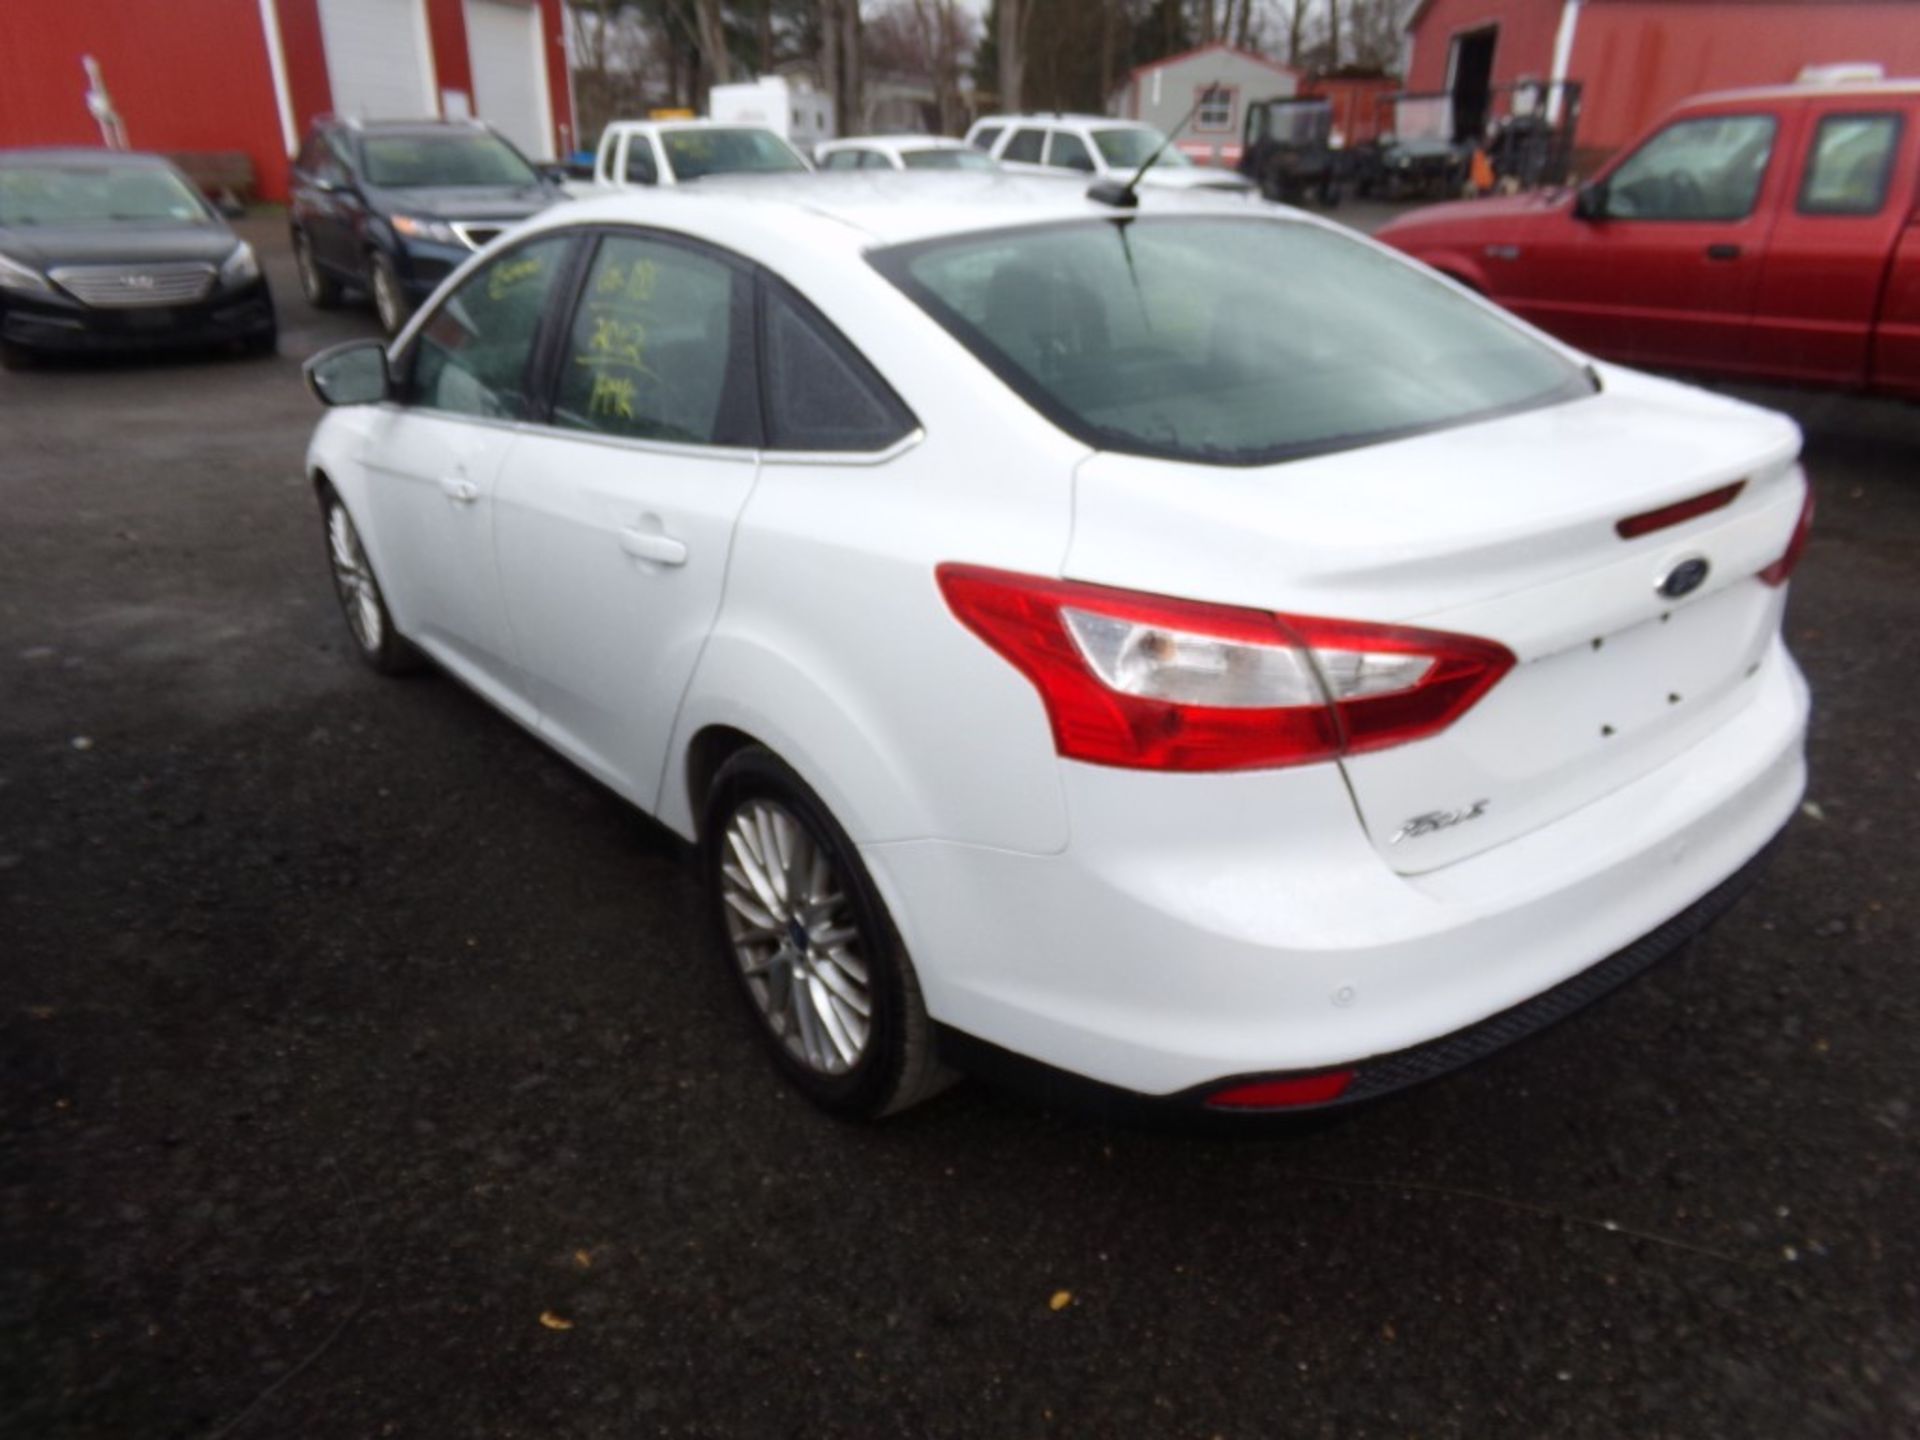 2012 Ford Focus SEL, White, Leather, Sunroof, 149,658 Miles, VIN#: 1FAHP3H27CL155840, WINDSHIELD - Image 2 of 5